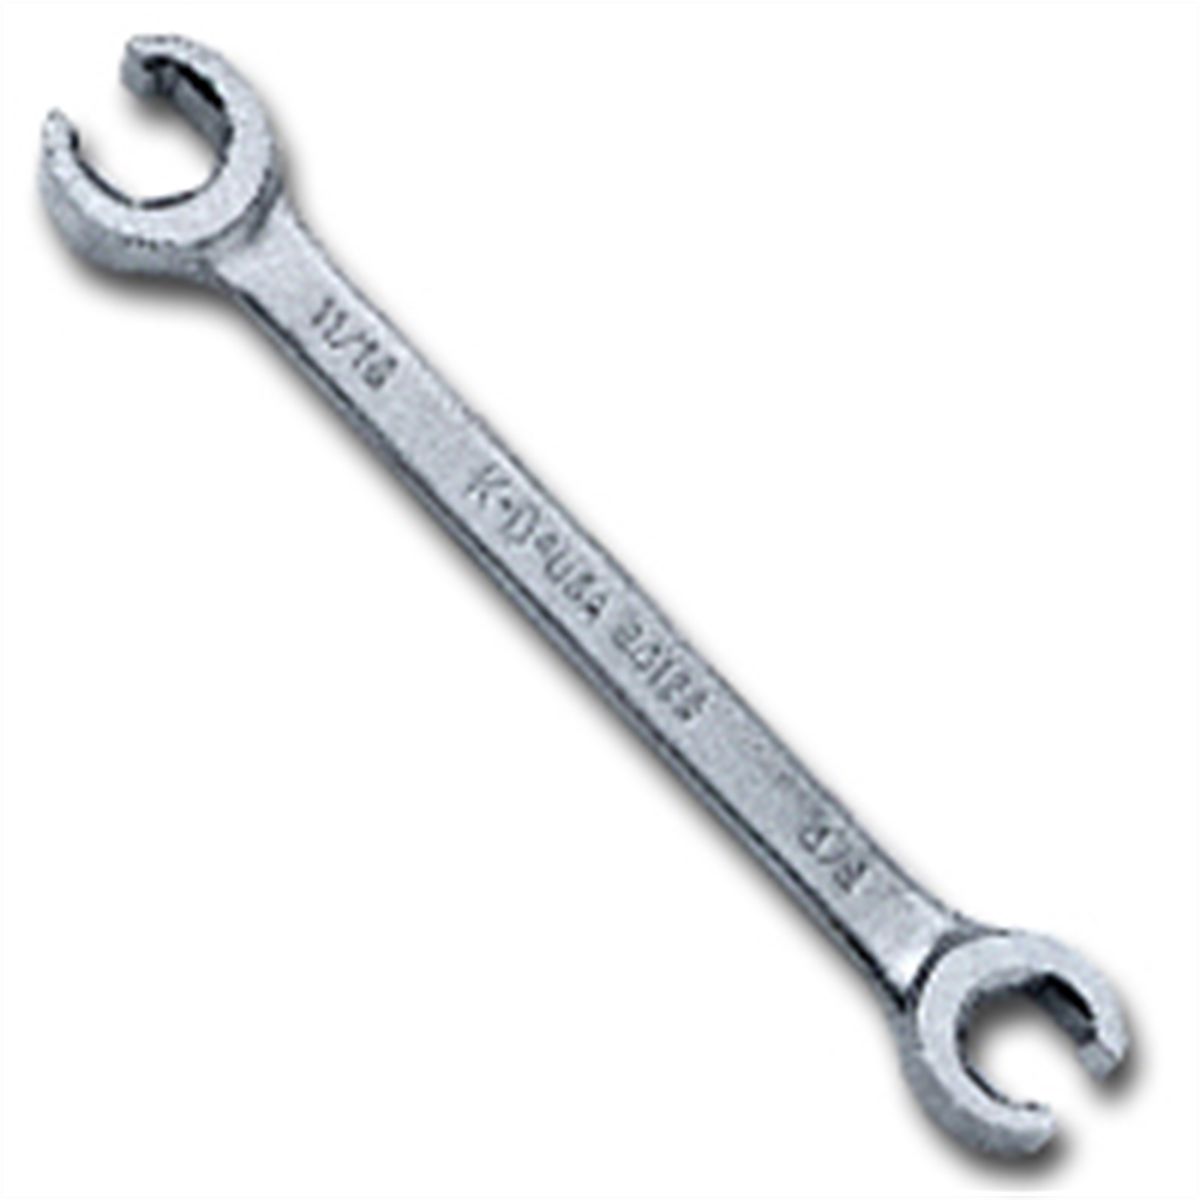 Flare Nut Wrench - 1/2In x 9/16 In